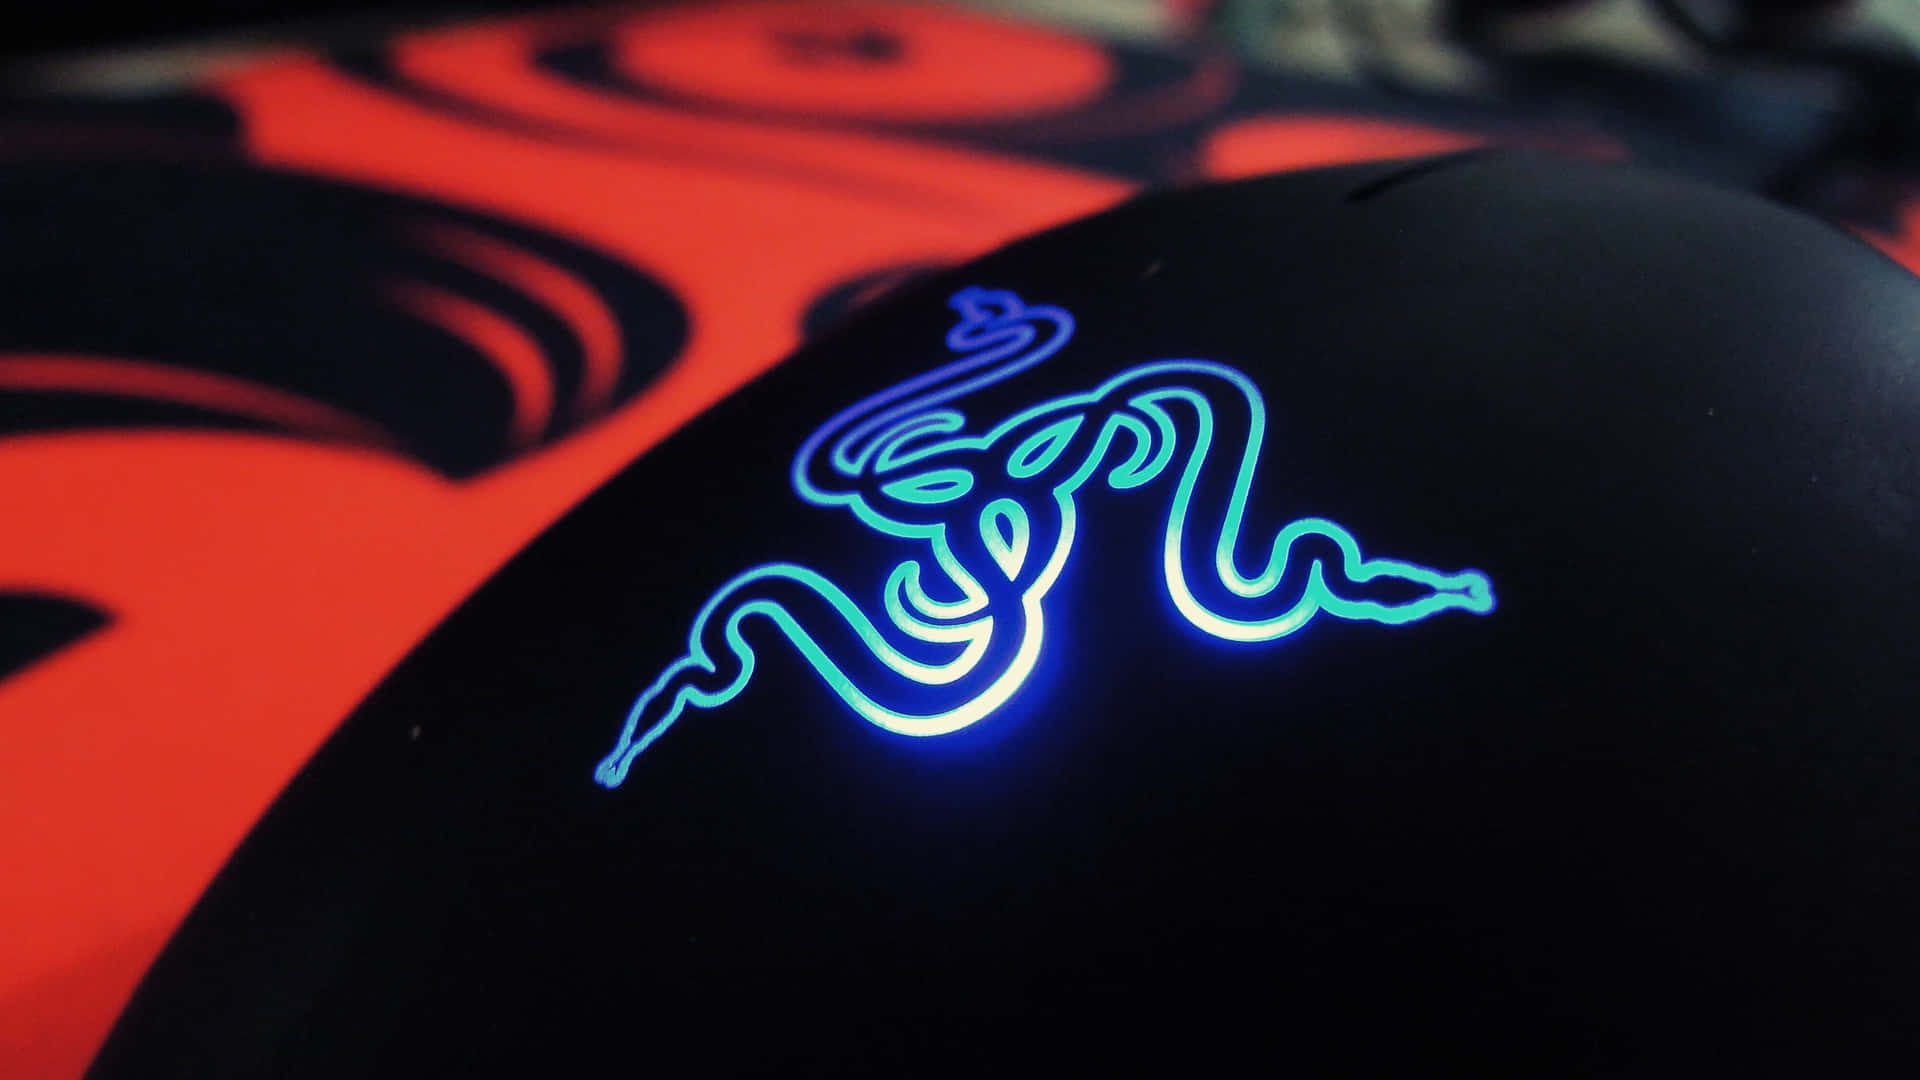 Professional Gaming Mouse with RGB Lighting Wallpaper